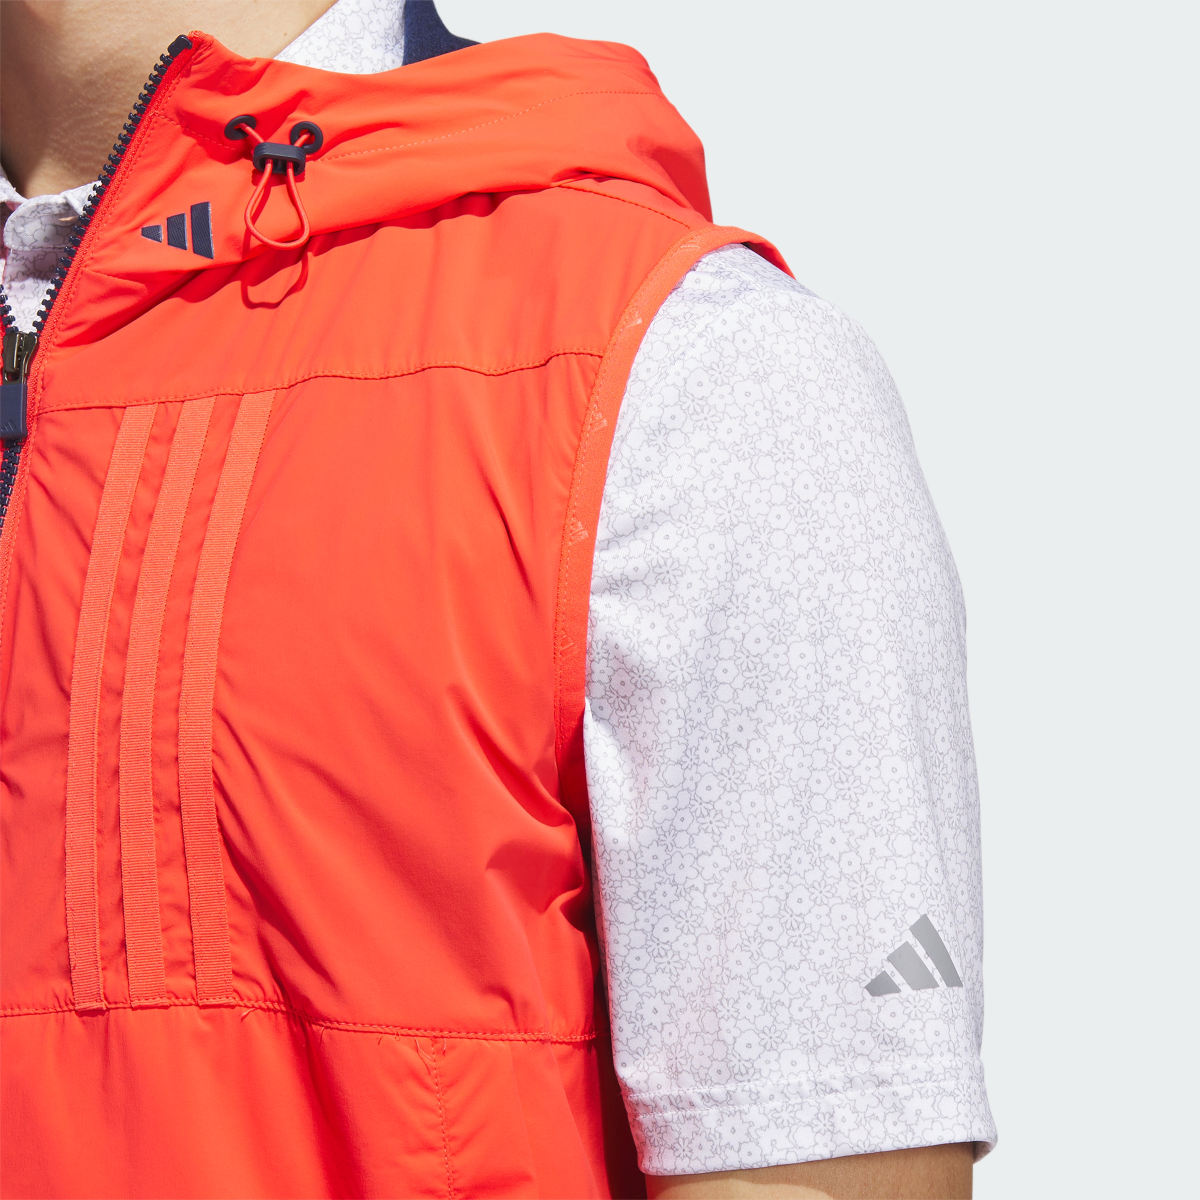 Adidas Ultimate365 Tour WIND.RDY Vest. 6